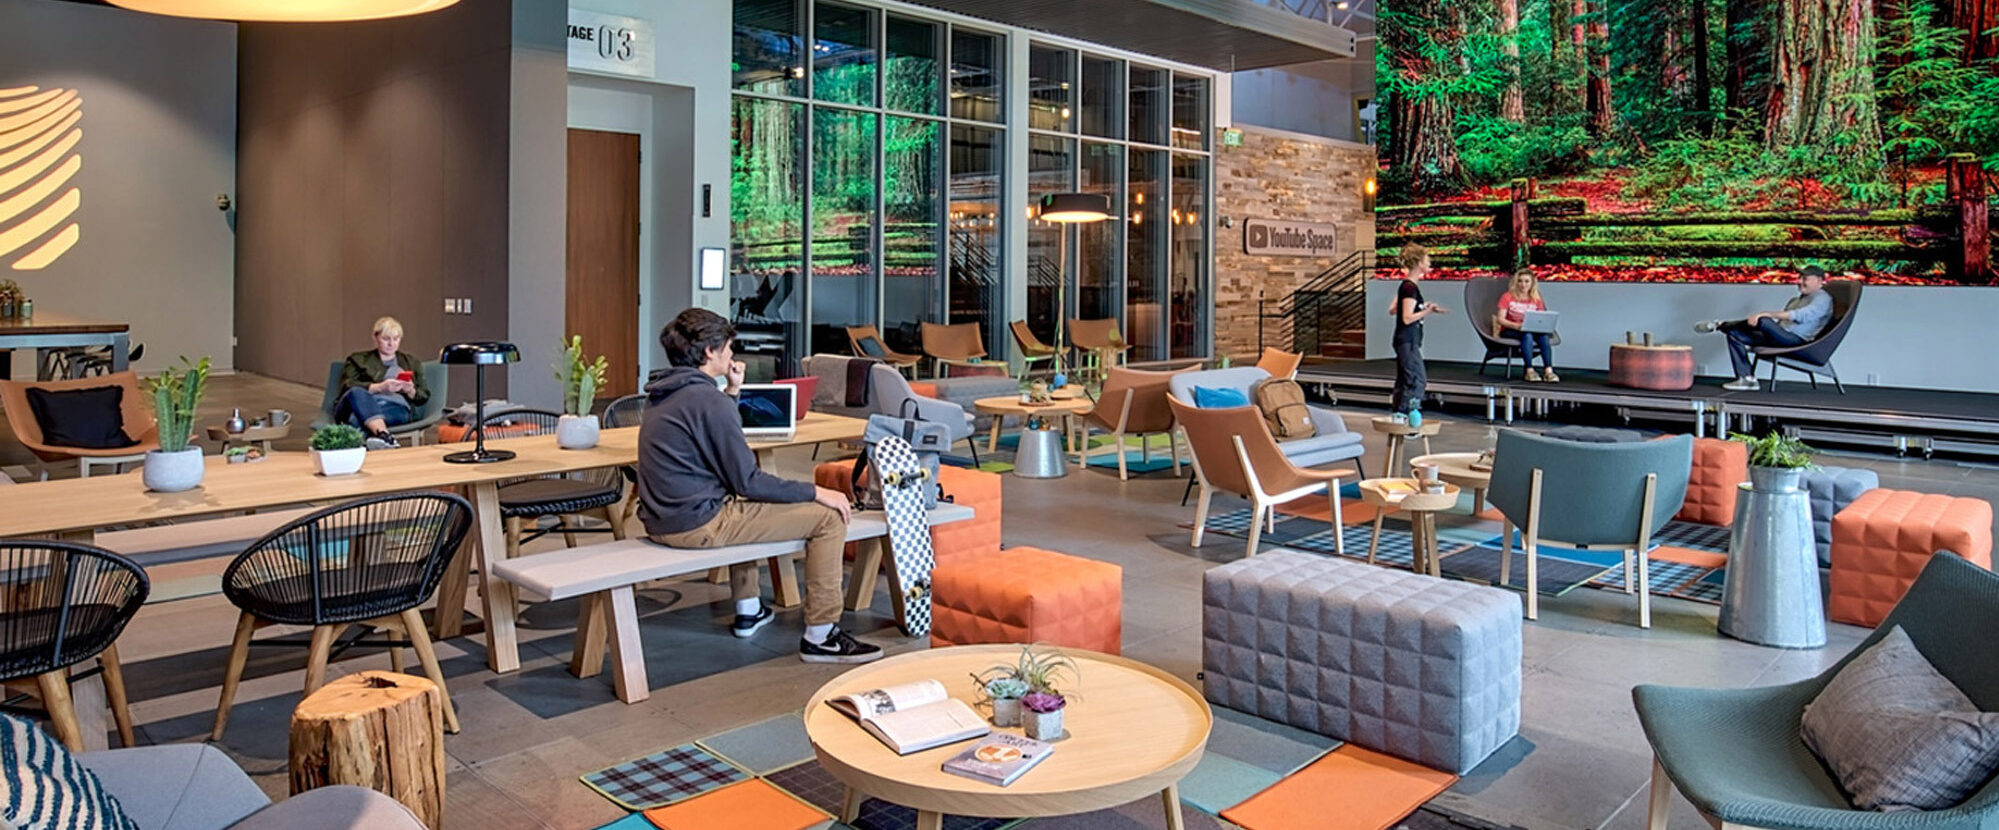 This contemporary workspace balances industrial chic with organic elements, featuring an expansive mural of a forest as a backdrop. Exposed ceiling infrastructure contrasts with warm wooden tables, eclectic seating arrangements, and a mix of geometric and organic patterns. Natural light complements the space's earthy color palette and dynamic layout, promoting a collaborative atmosphere.